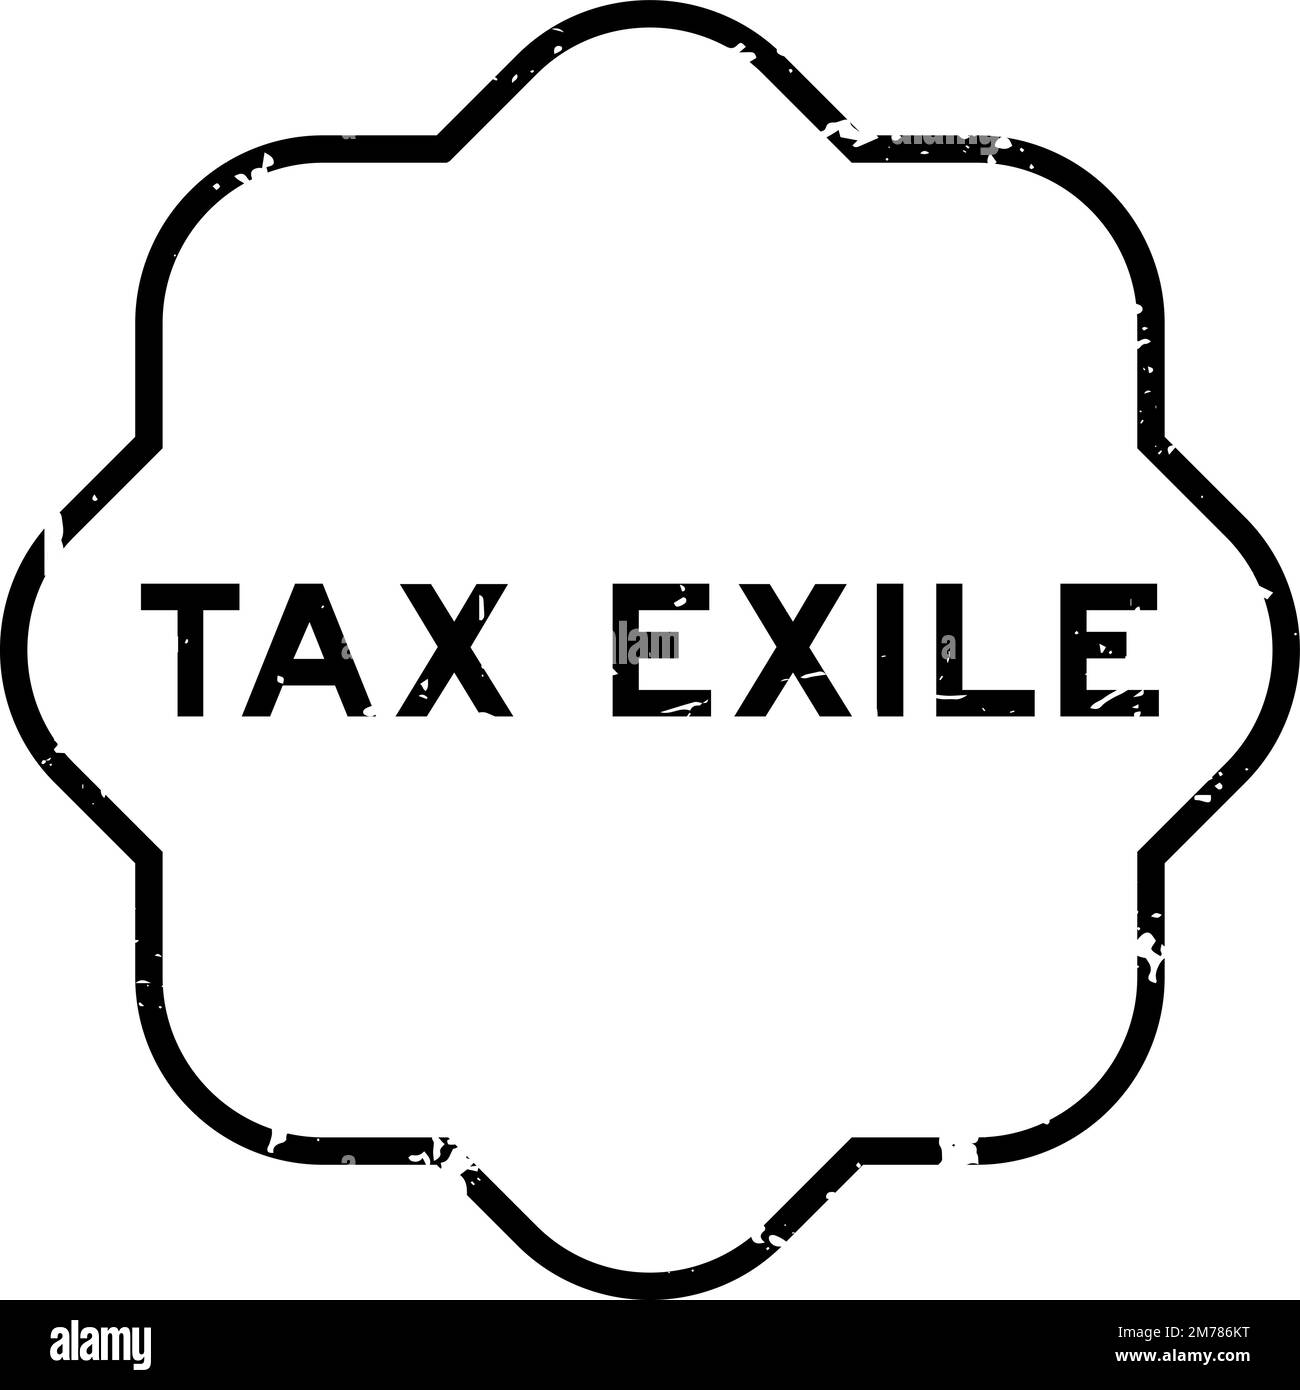 Grunge black tax exile word rubber seal stamp on white background Stock Vector